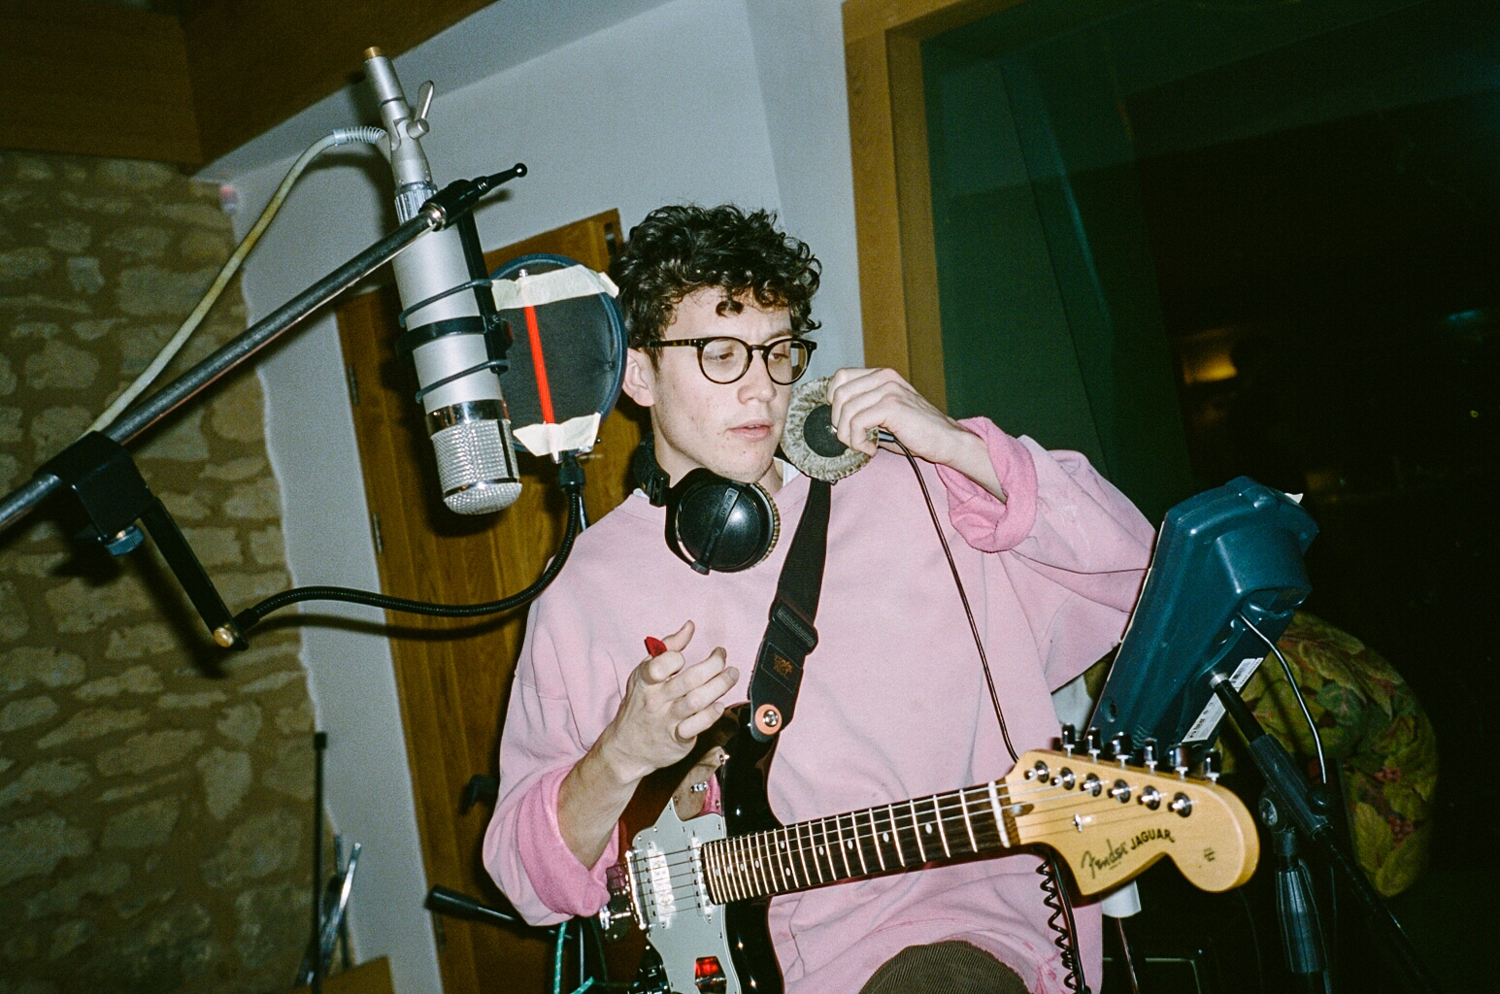 The Magic Gang: “We had to try not to be so self-indulgent"